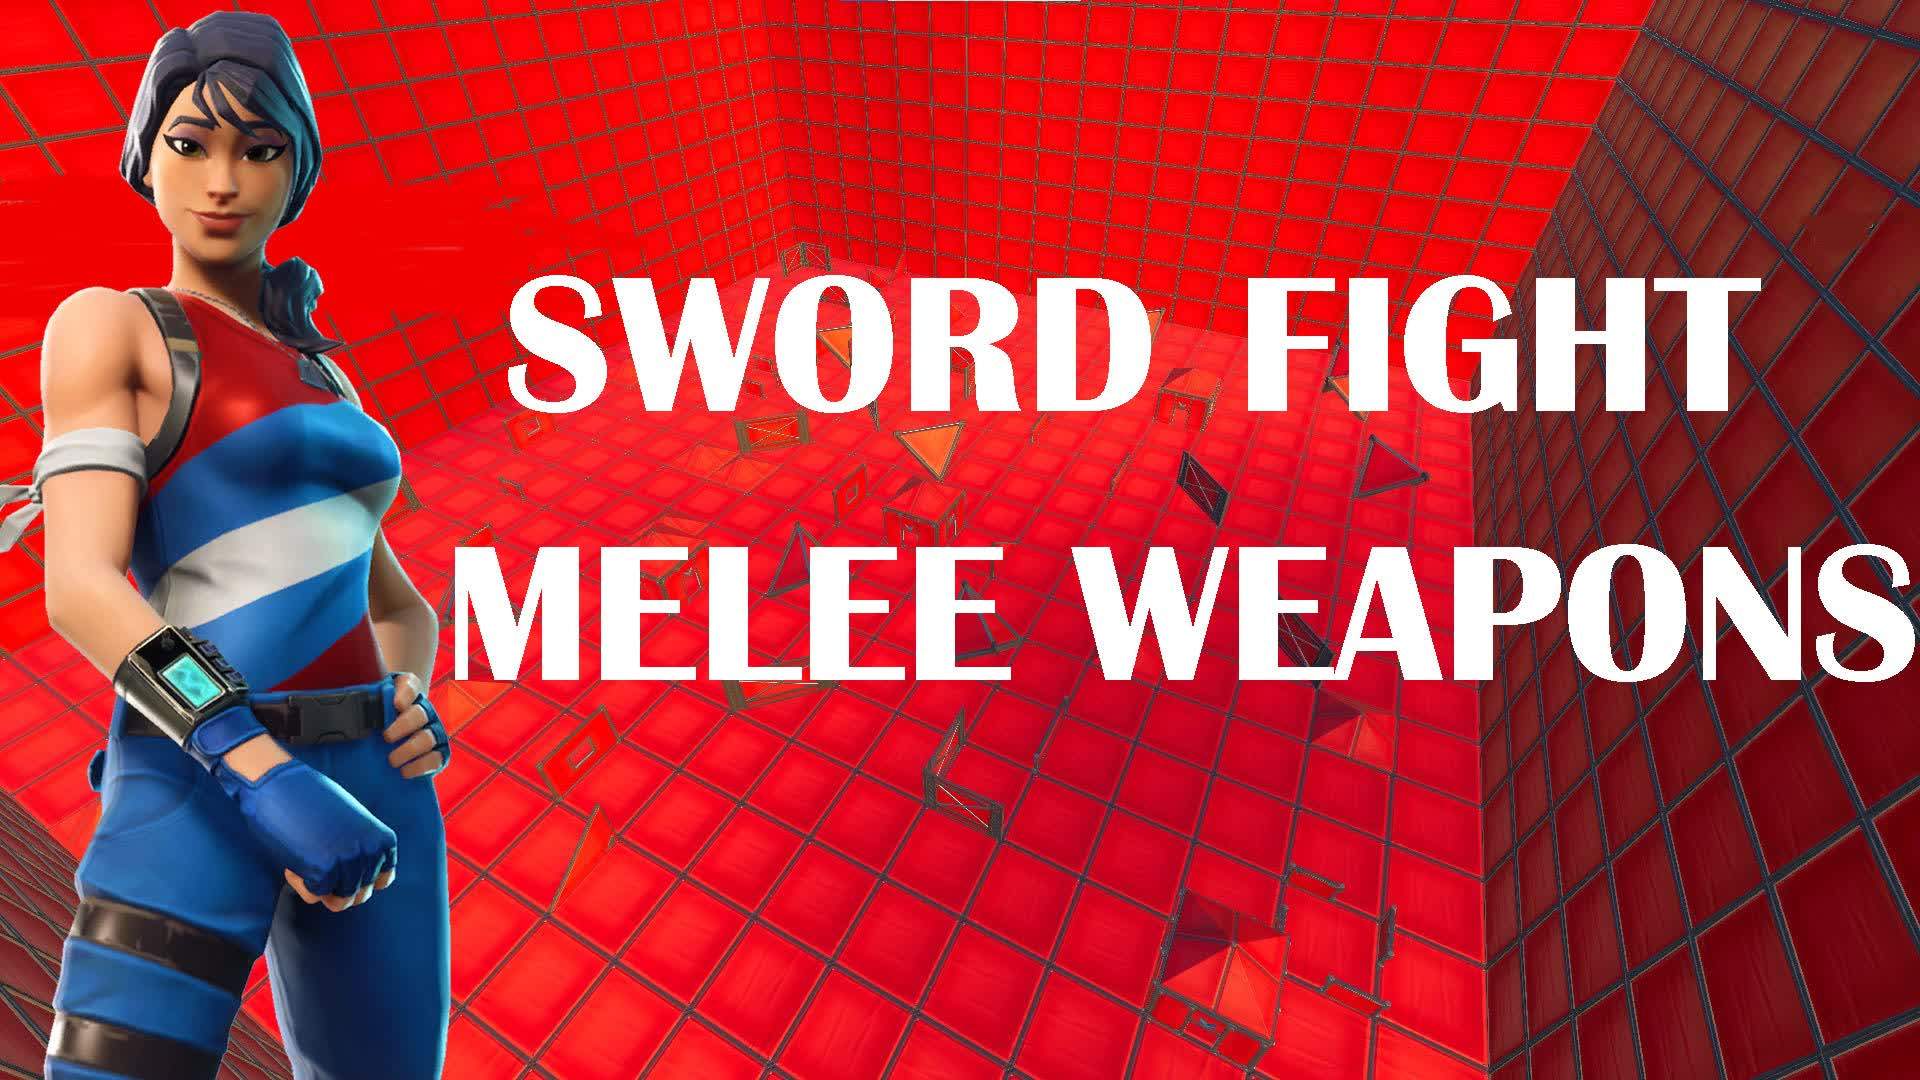 FREE FOR ALL -MELEE WEAPONS -SWORD FIGHT